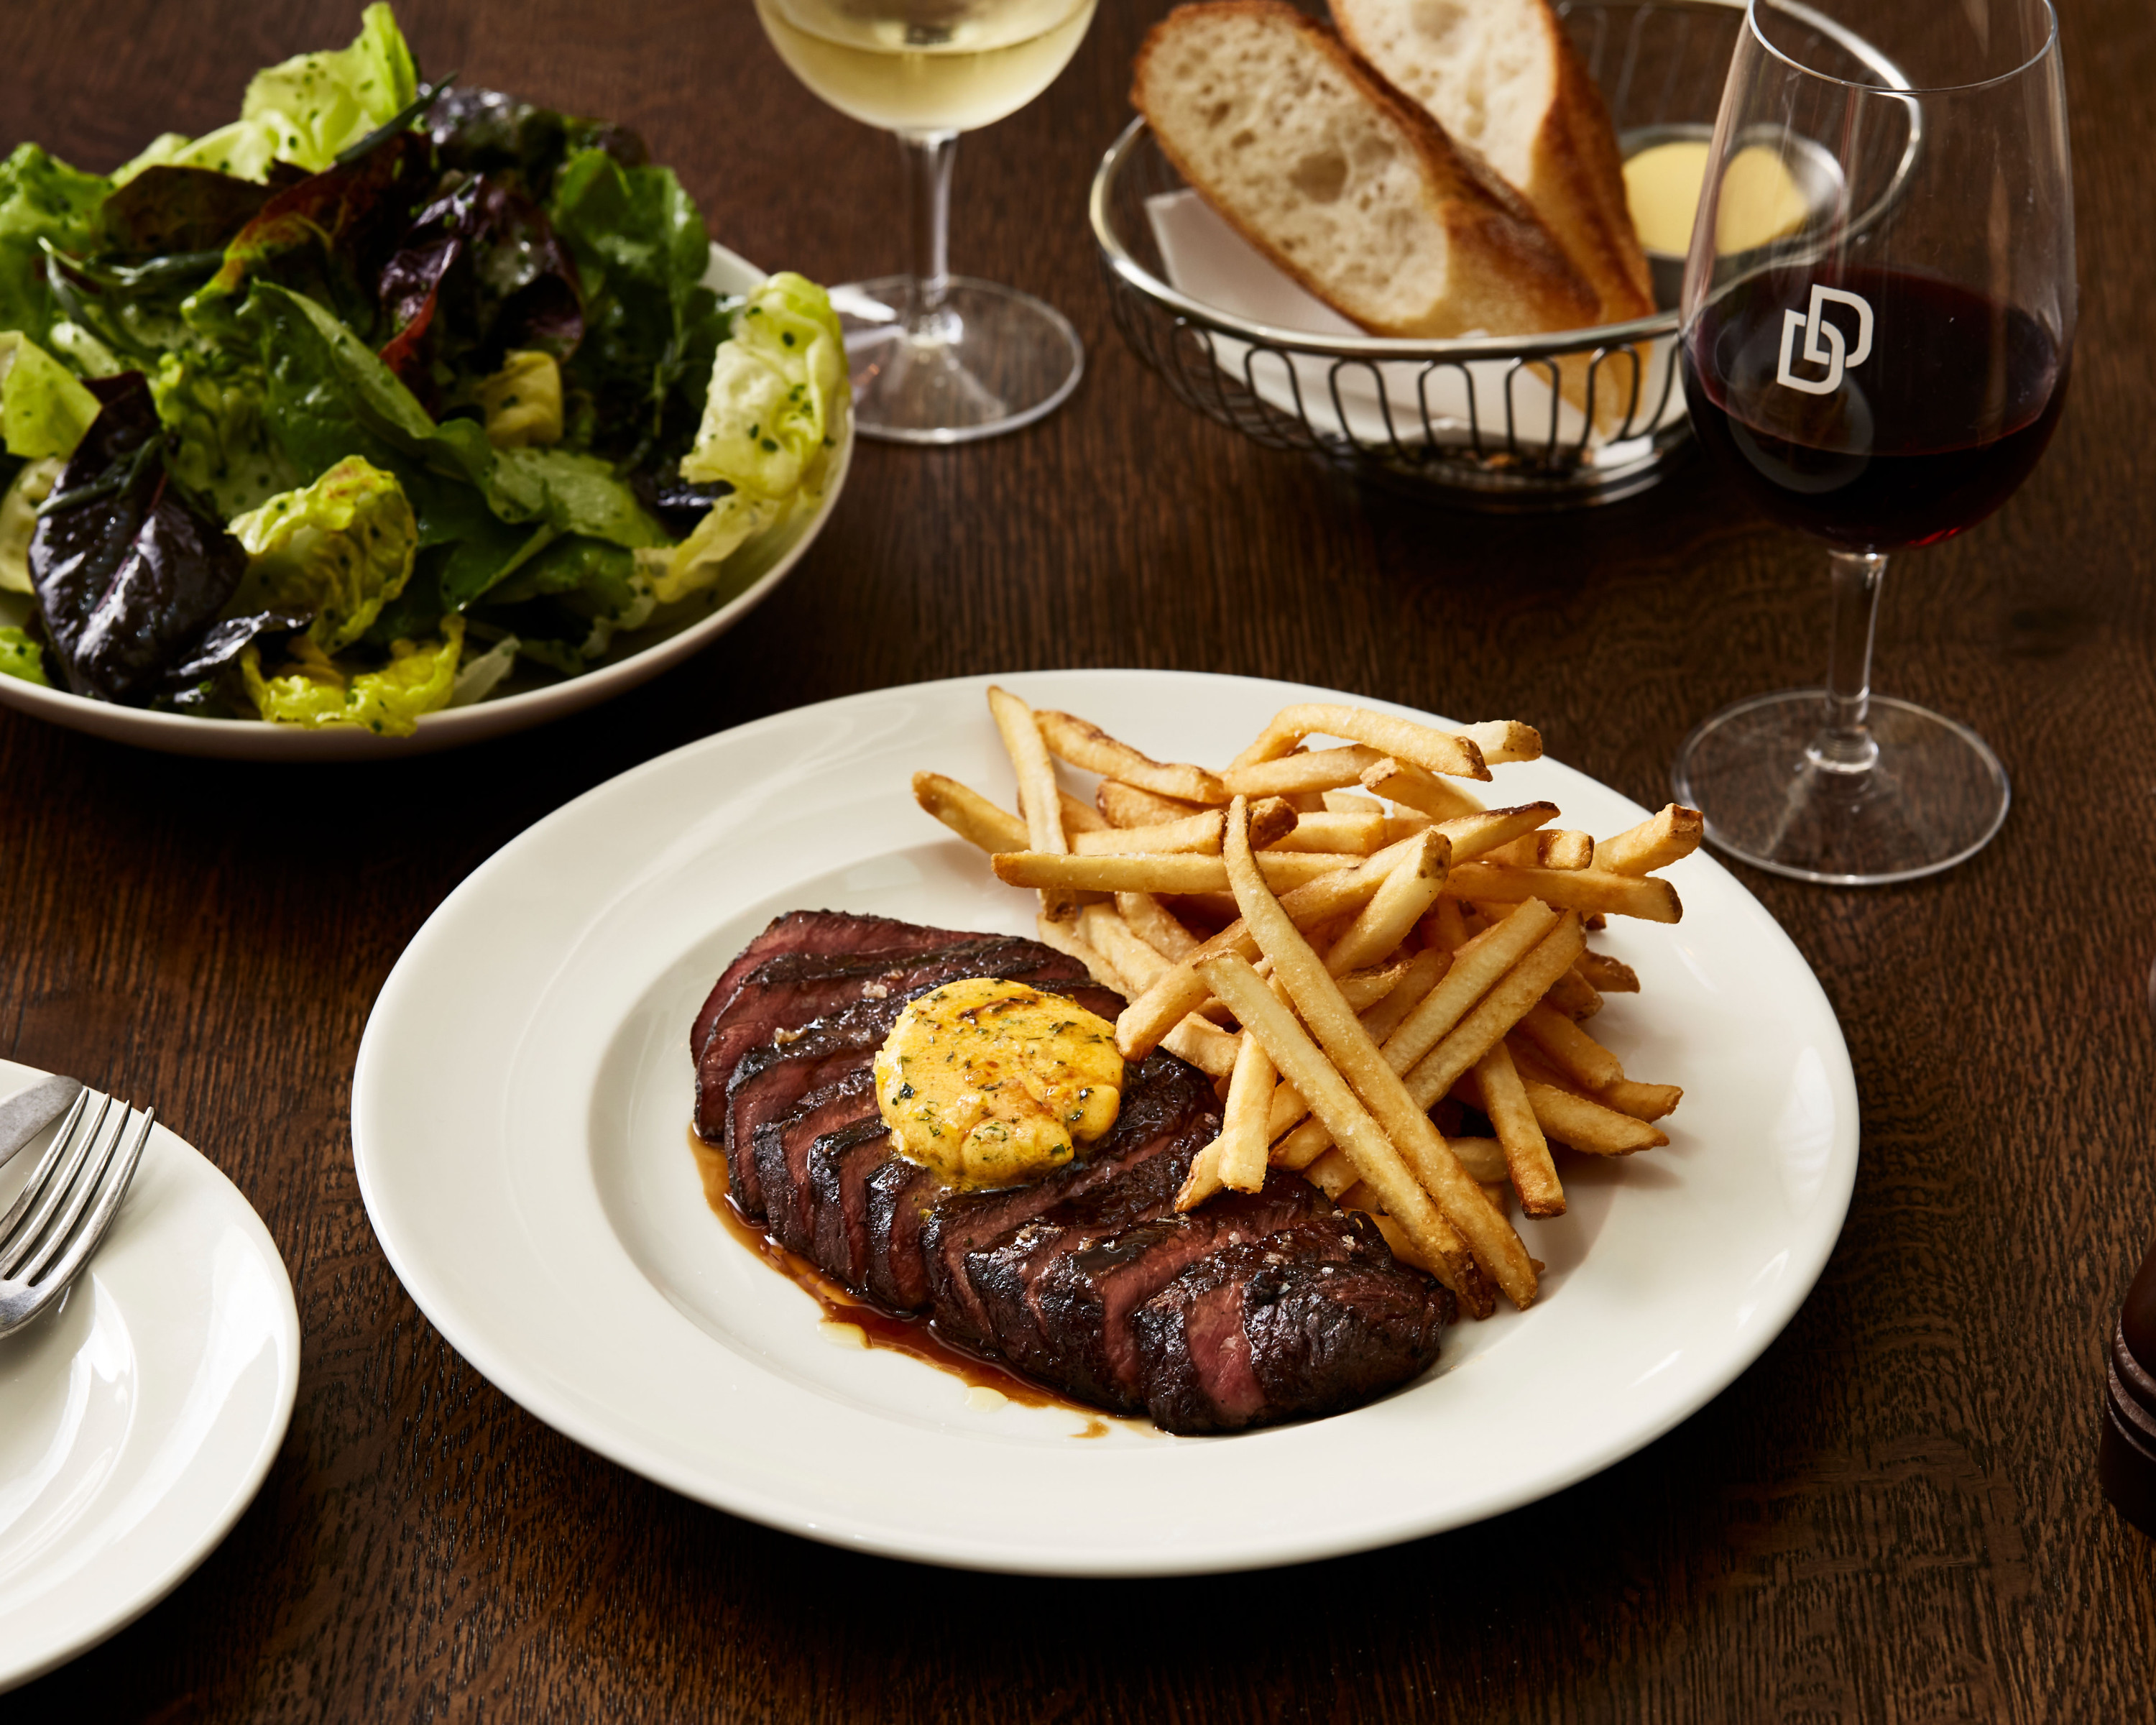 Steak frites from The Dry Dock, one of the best pubs in Sydney